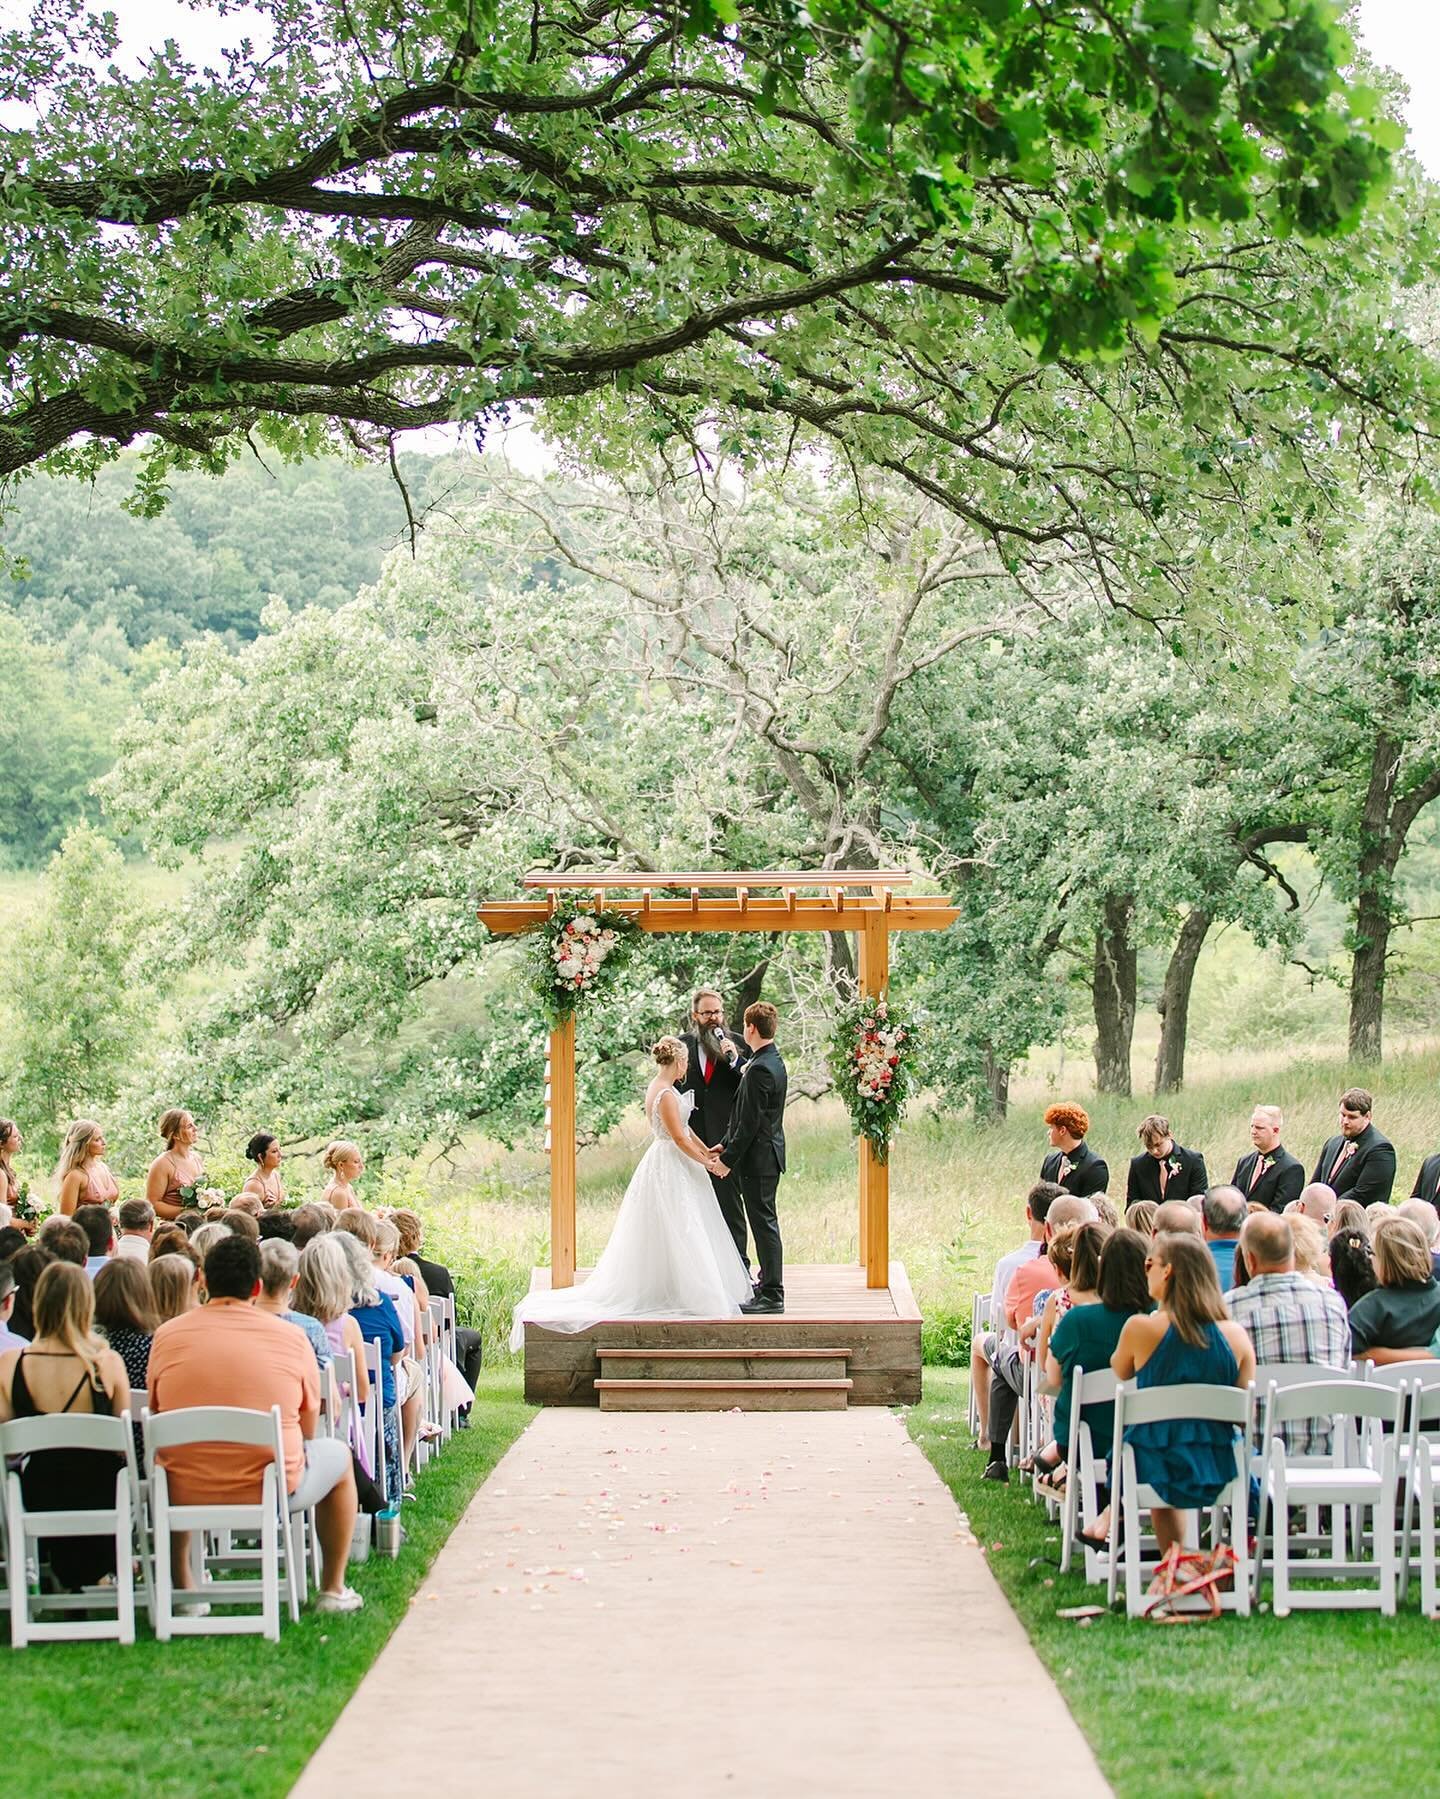 I&rsquo;ve been finding myself daydreaming about wedding ceremonies lately 🥰 Such special moments that I am so excited to capture for my 2024 couples! #kristaesterlingphotography #minneapolisweddingphotographer